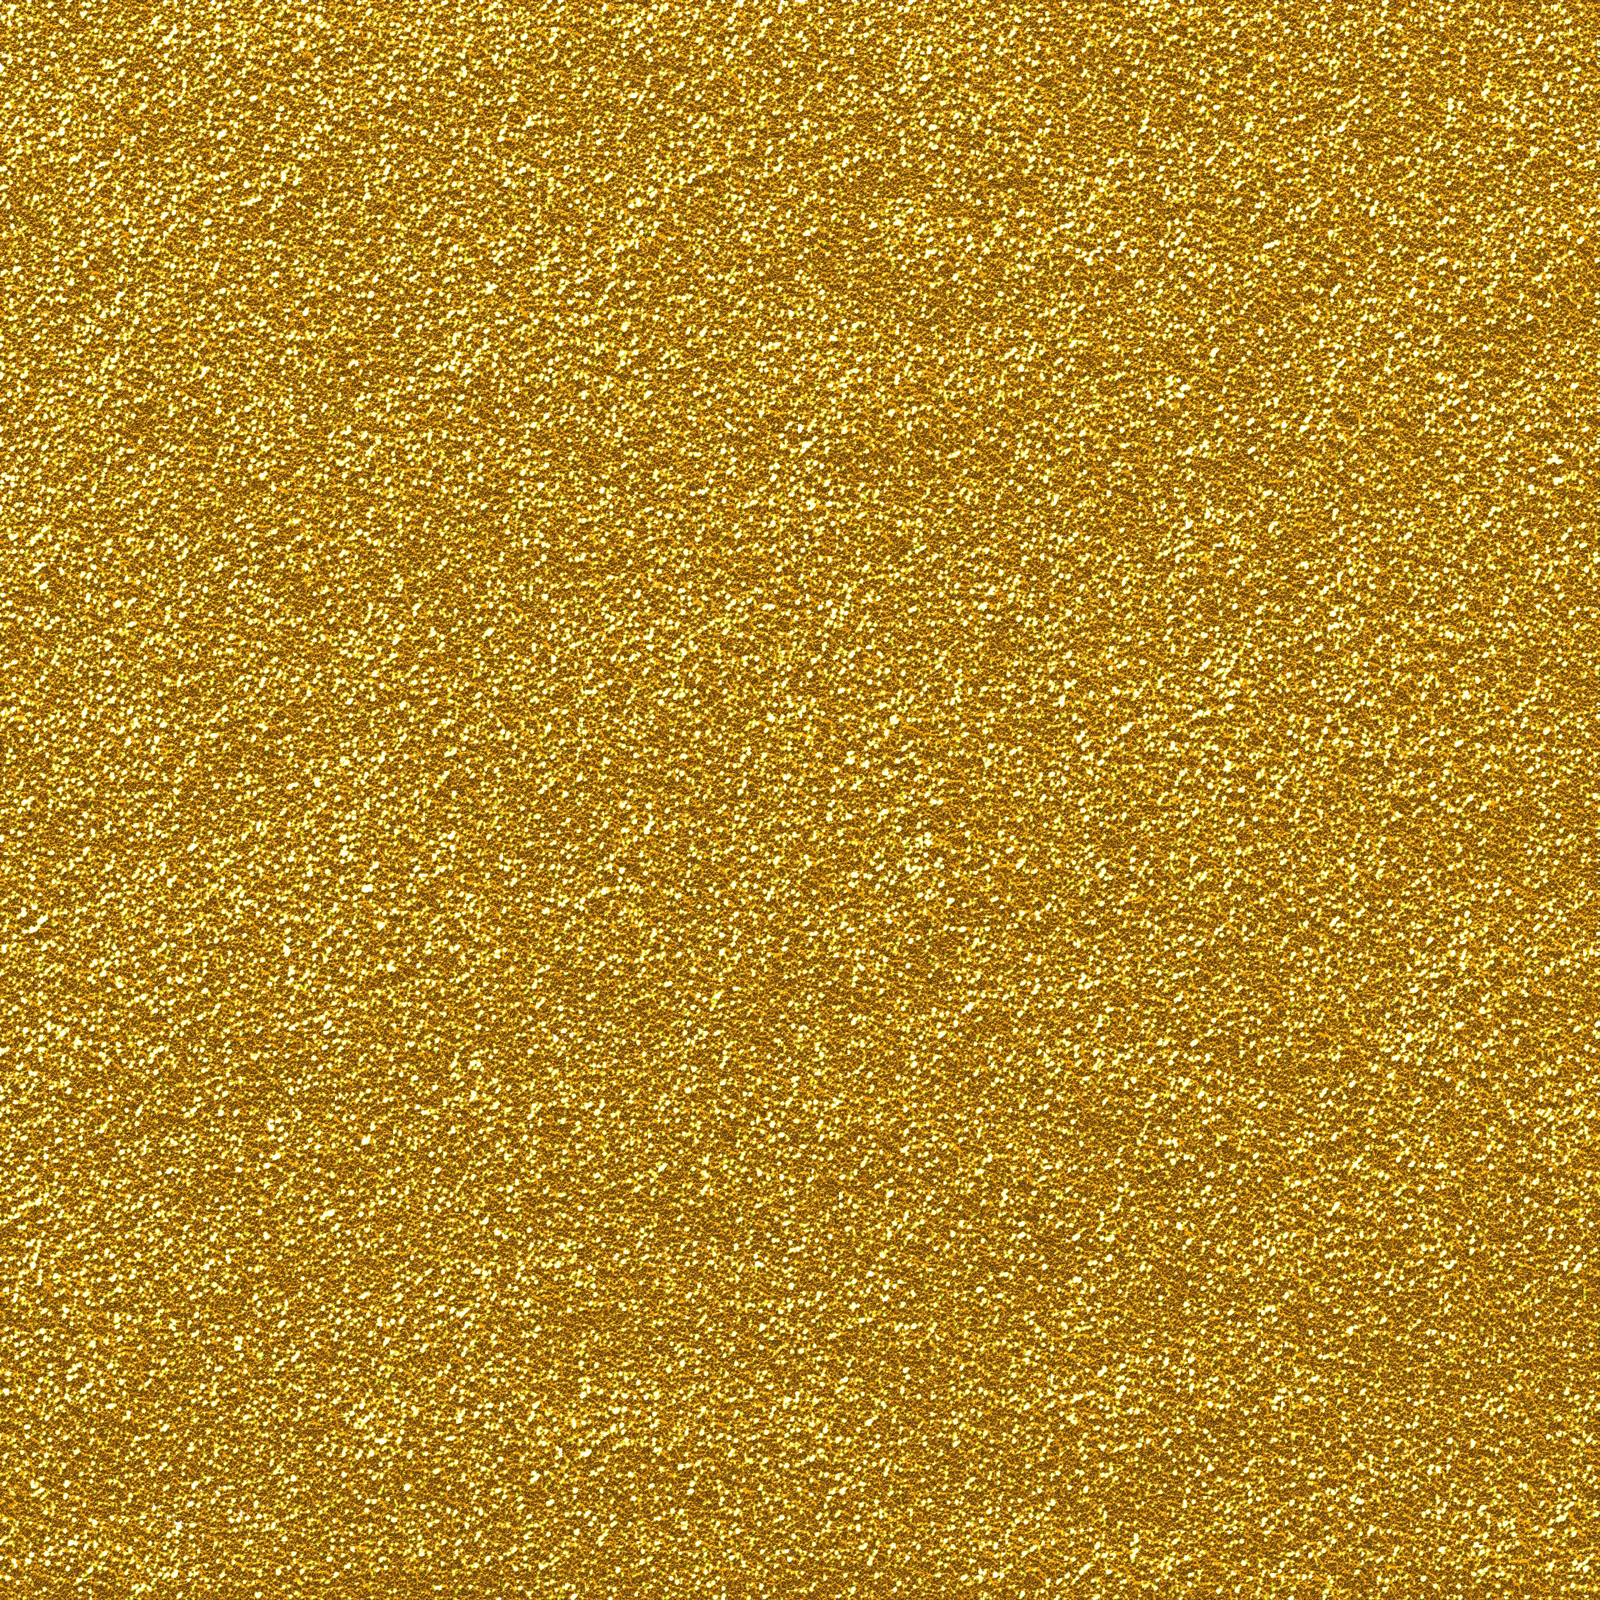 Gold Texture, Abstract, Gold, Graphic, Metal, HQ Photo